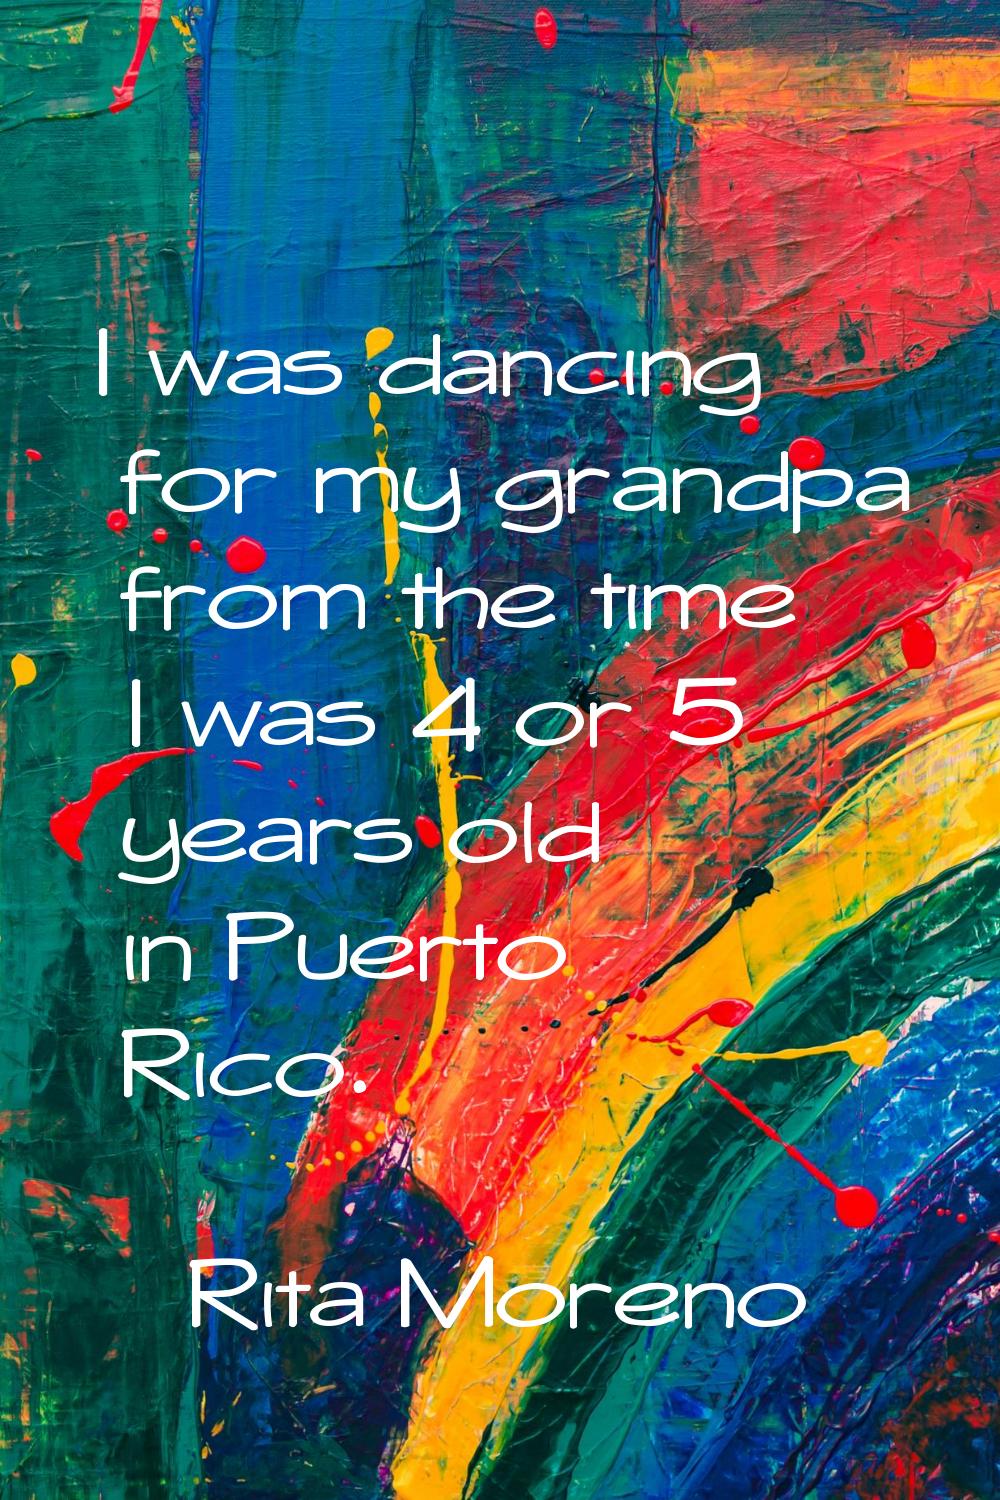 I was dancing for my grandpa from the time I was 4 or 5 years old in Puerto Rico.